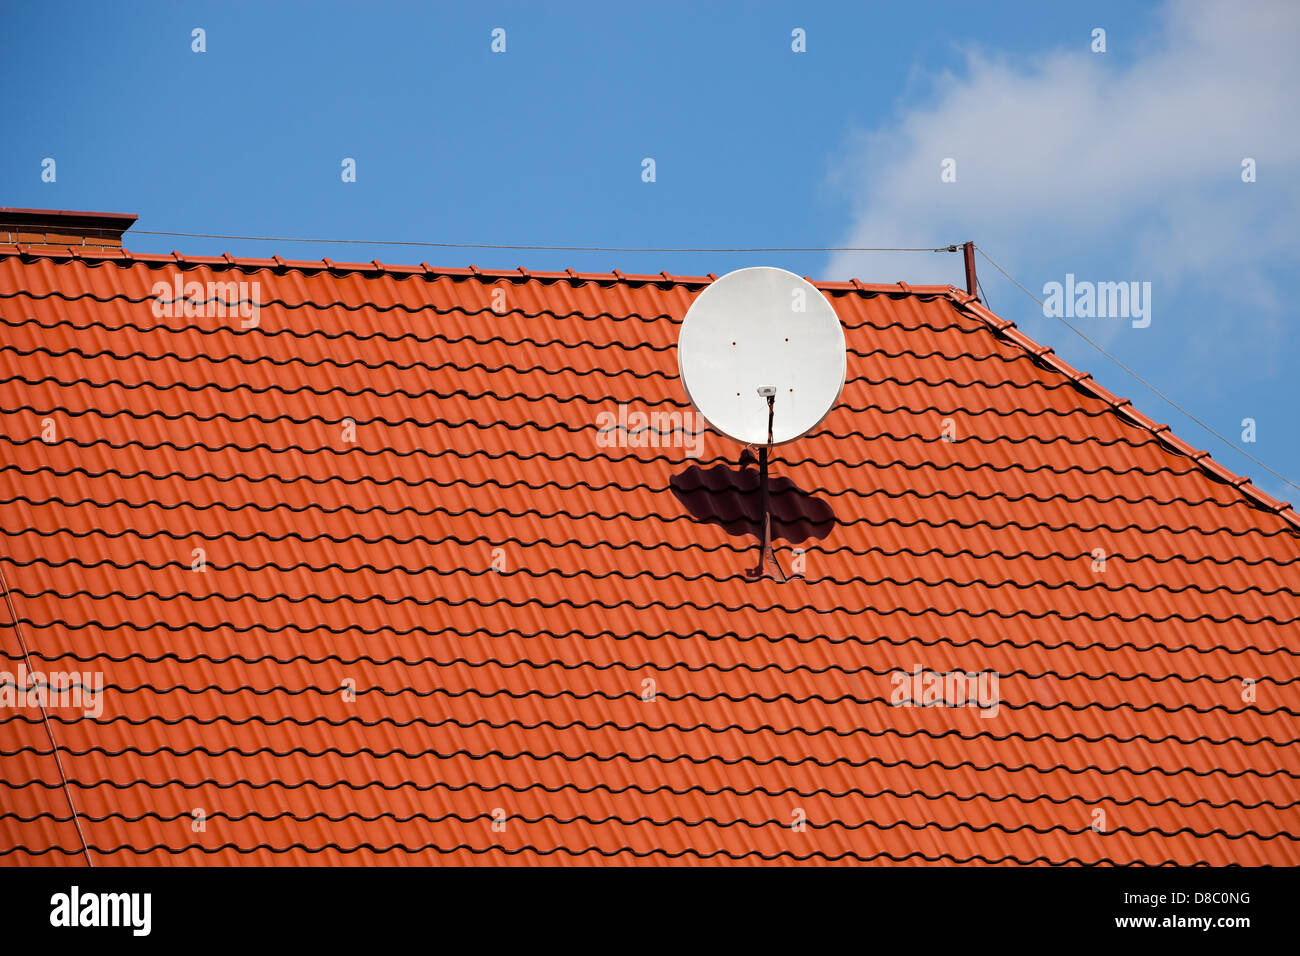 Tv satellite dish on red tiles roof. Stock Photo